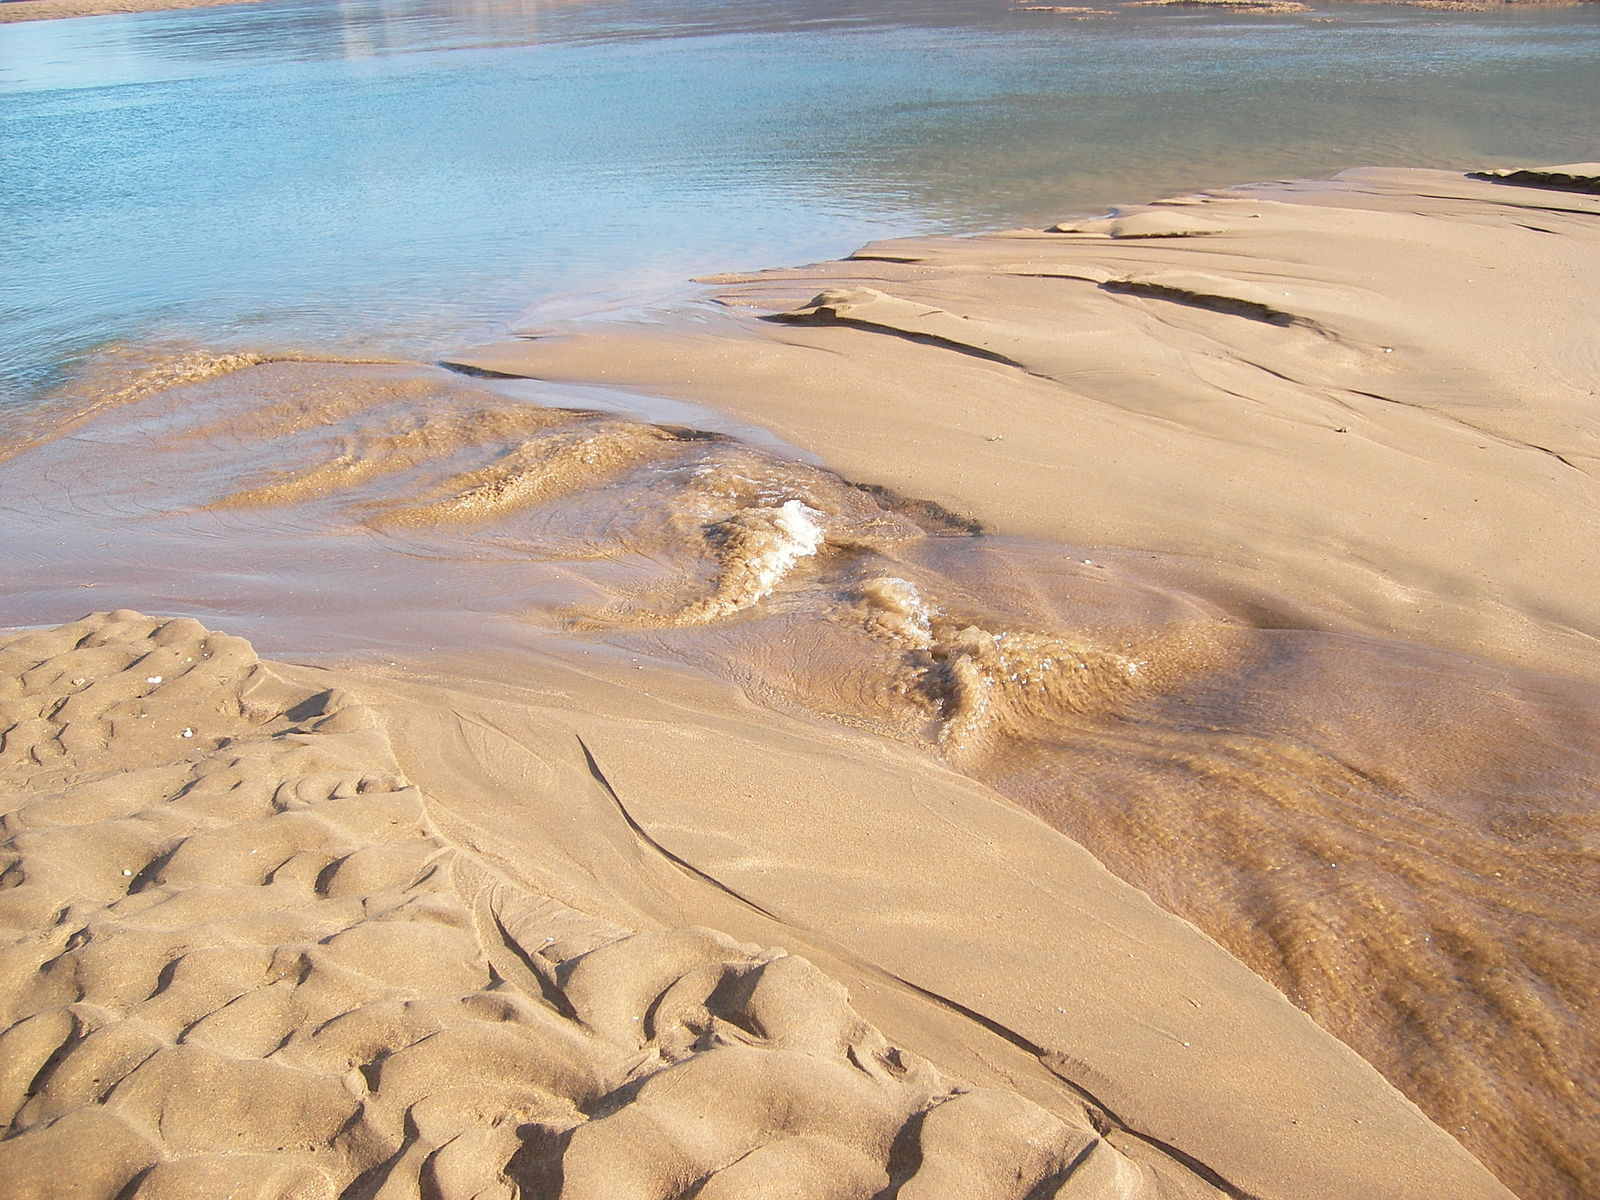 A shallow stream of water flows over a sandy bank toward a larger pool; the water stream has small waves in it as it travels over depressions in the sand.